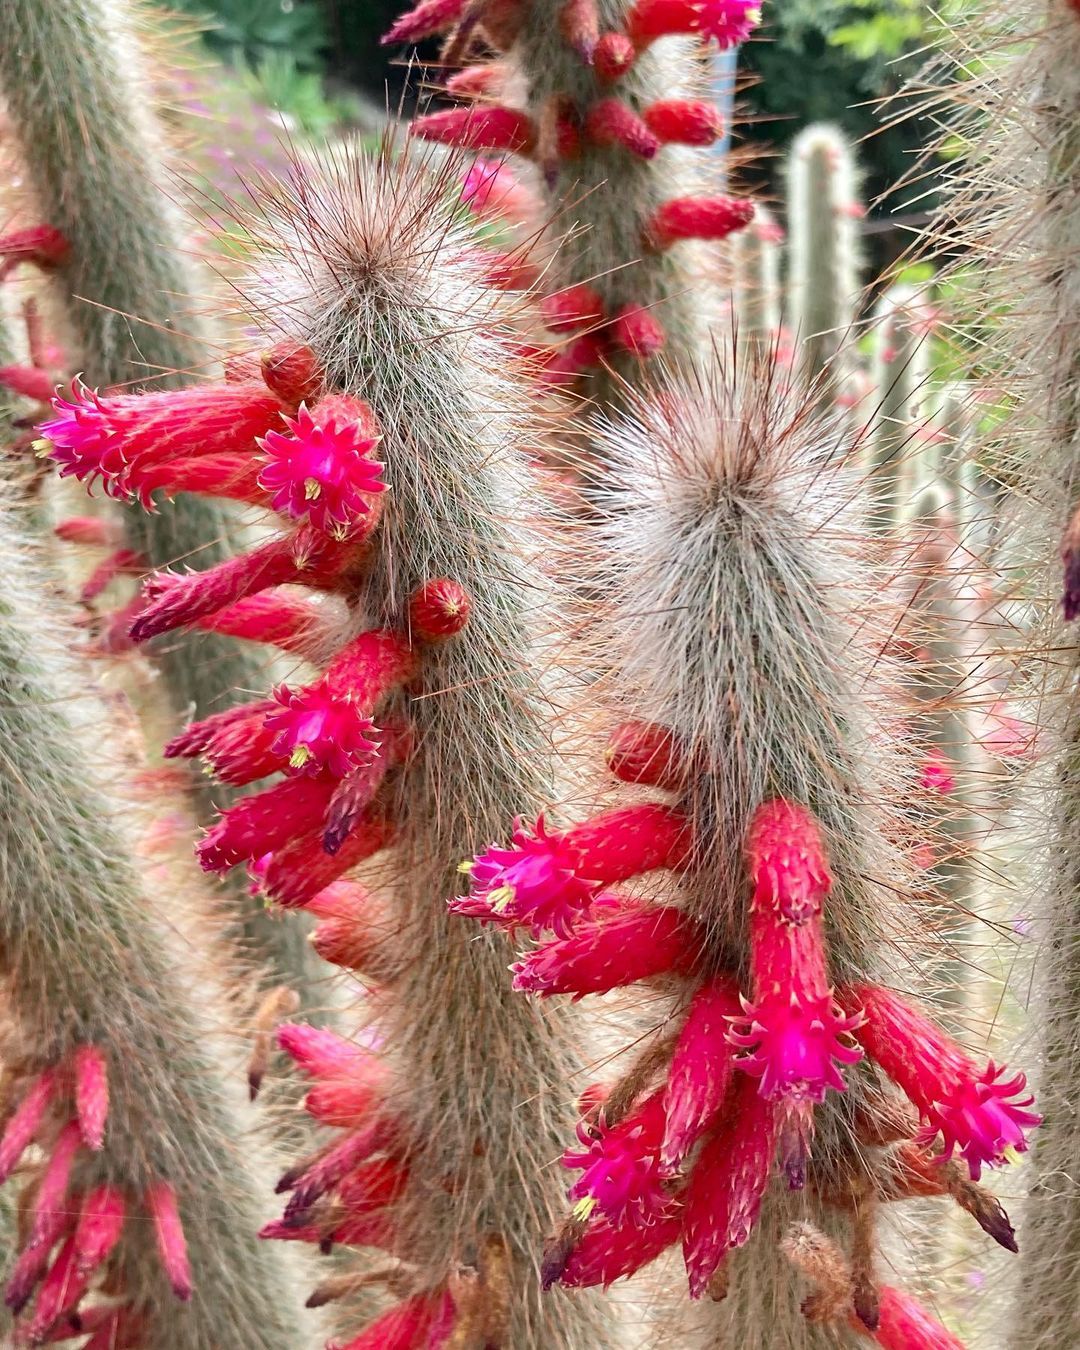 Cleistocactus Hyalacanthus